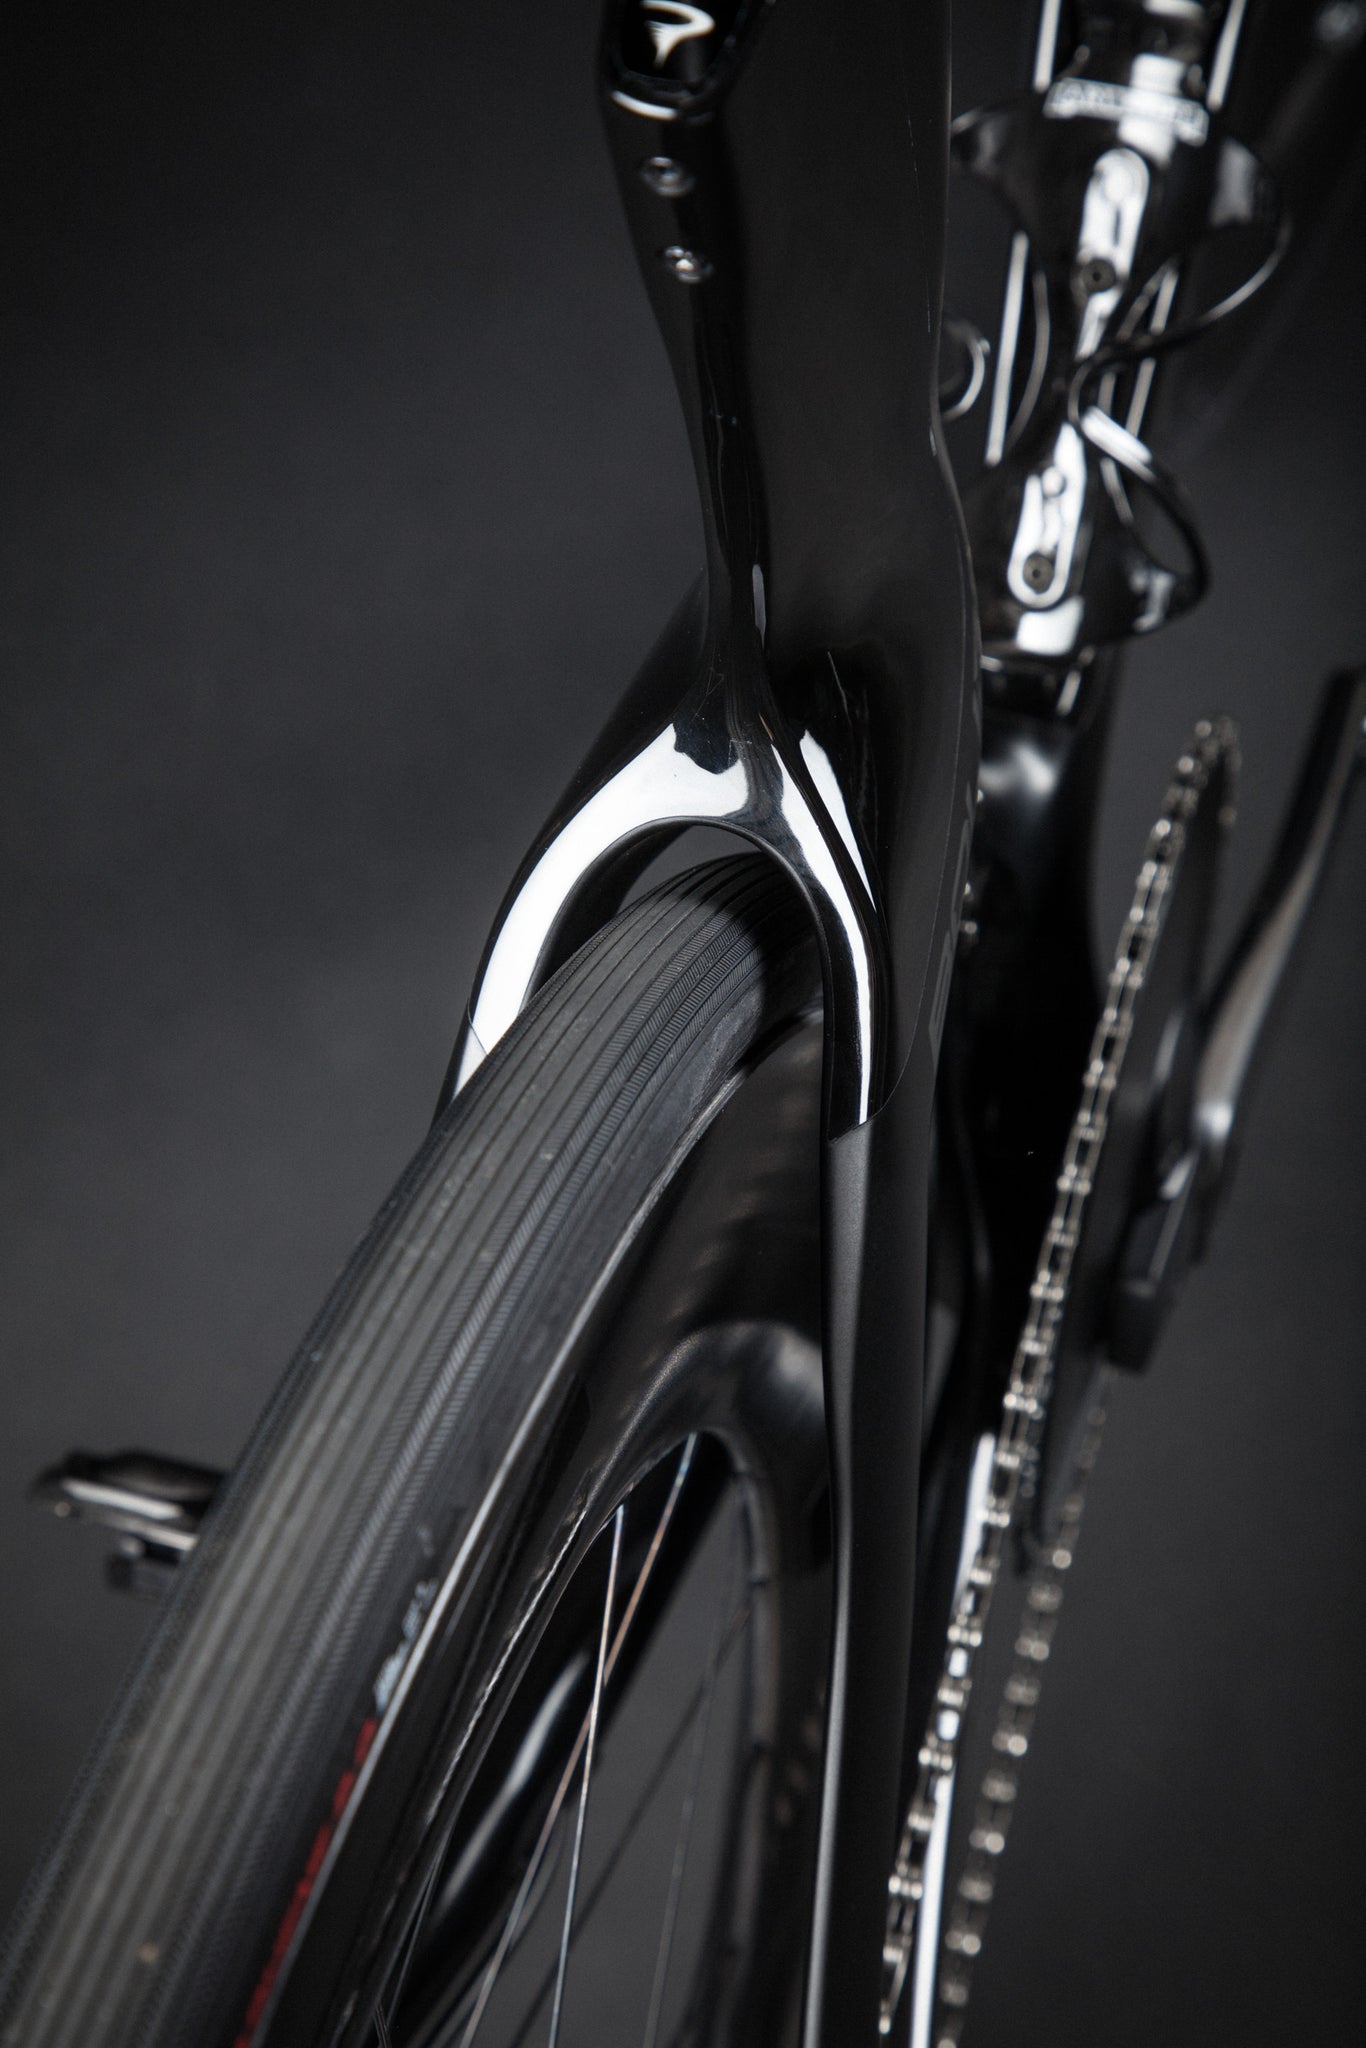 A Blacked Out Pinarello Bolide Gallery wheel rear stays